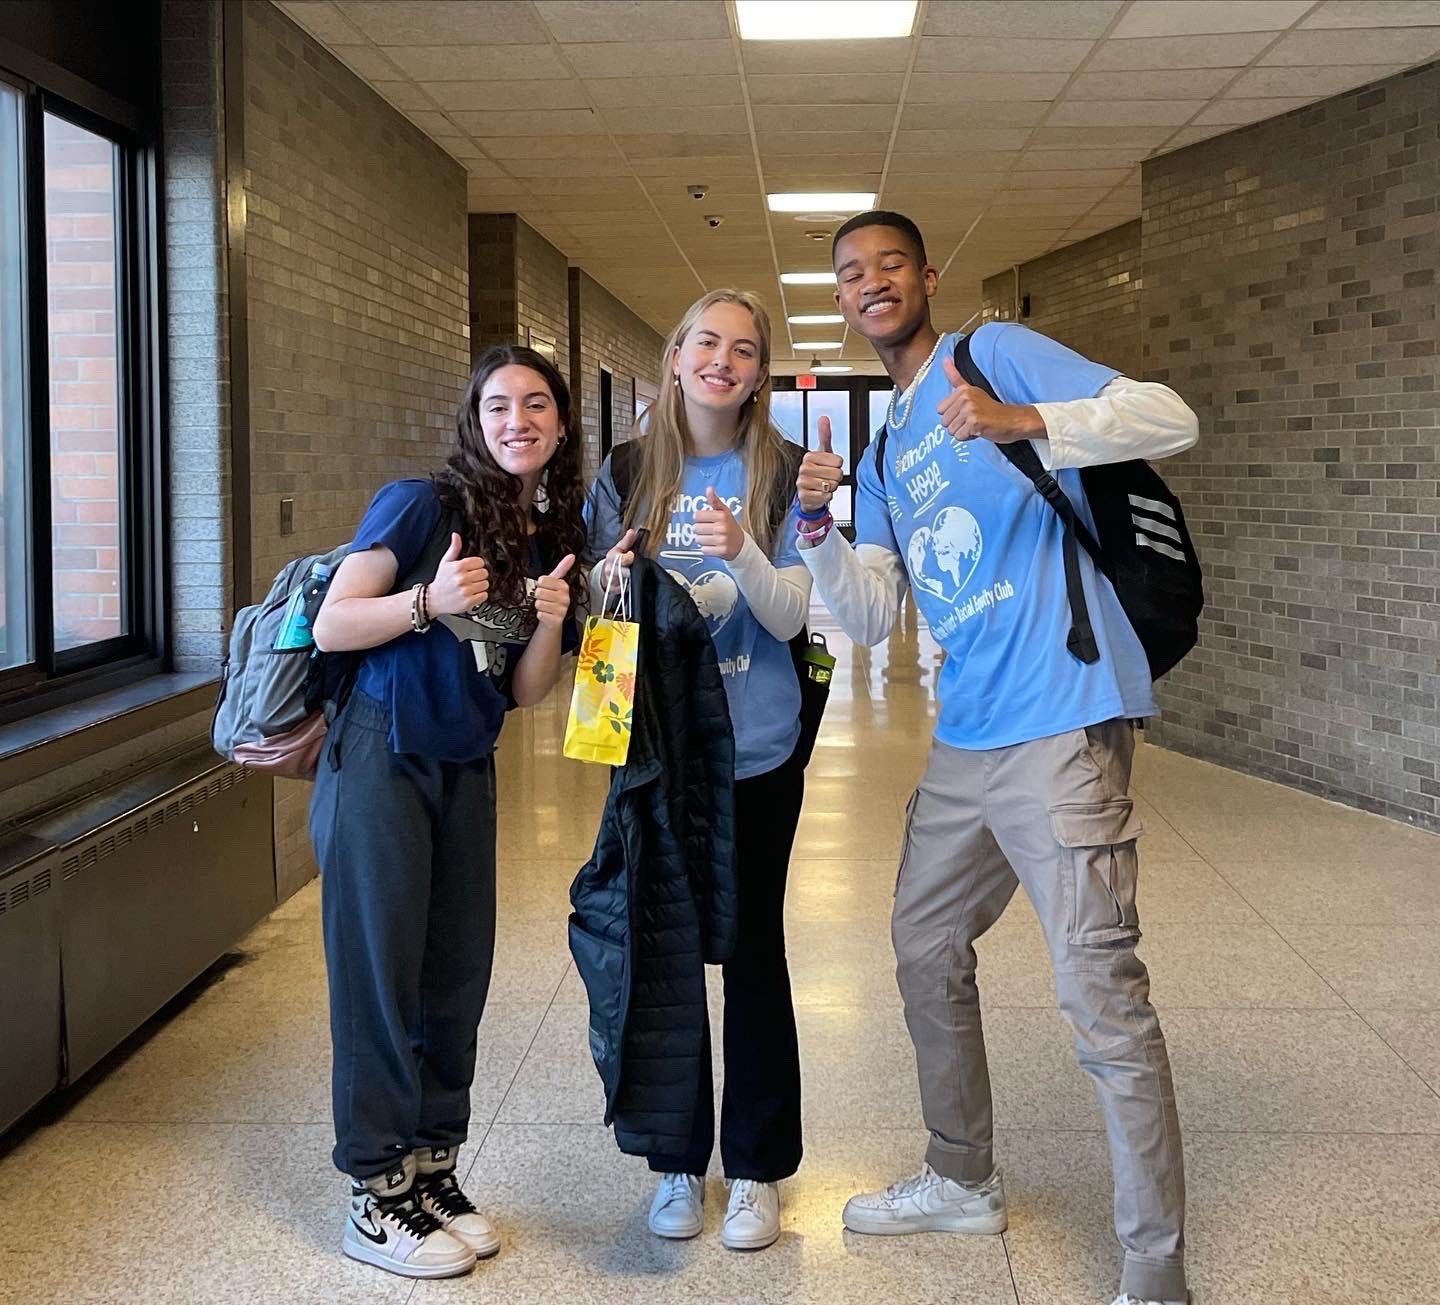 Gabriella Facciponti, Ashleigh Coyne and Nickolas Mascary, members of Calhoun’s Racial Equity Club, wore blue shirts in support of the Hope Project for Haiti.